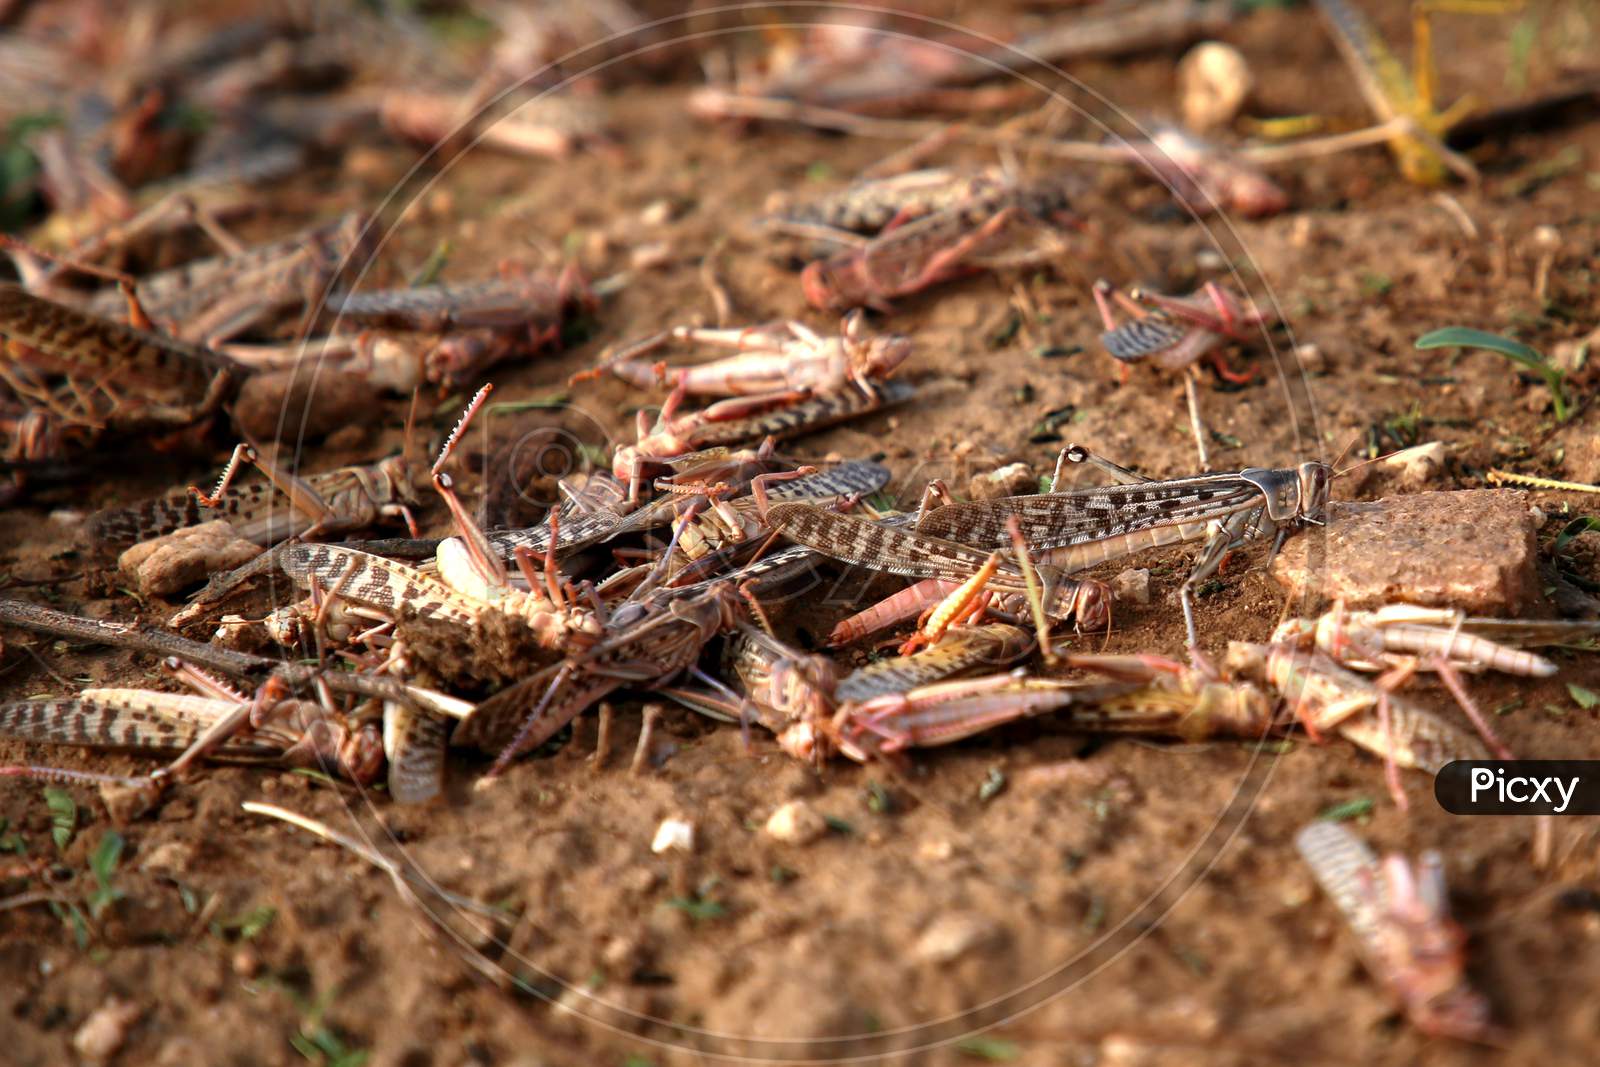 Dead Locusts Pictured At A Farm After Pesticide Spraying By Rajasthan Agriculture Department Team On Locust Swarms In Outskirts Village Of Ajmer, Rajasthan, India On 10 June 2020.